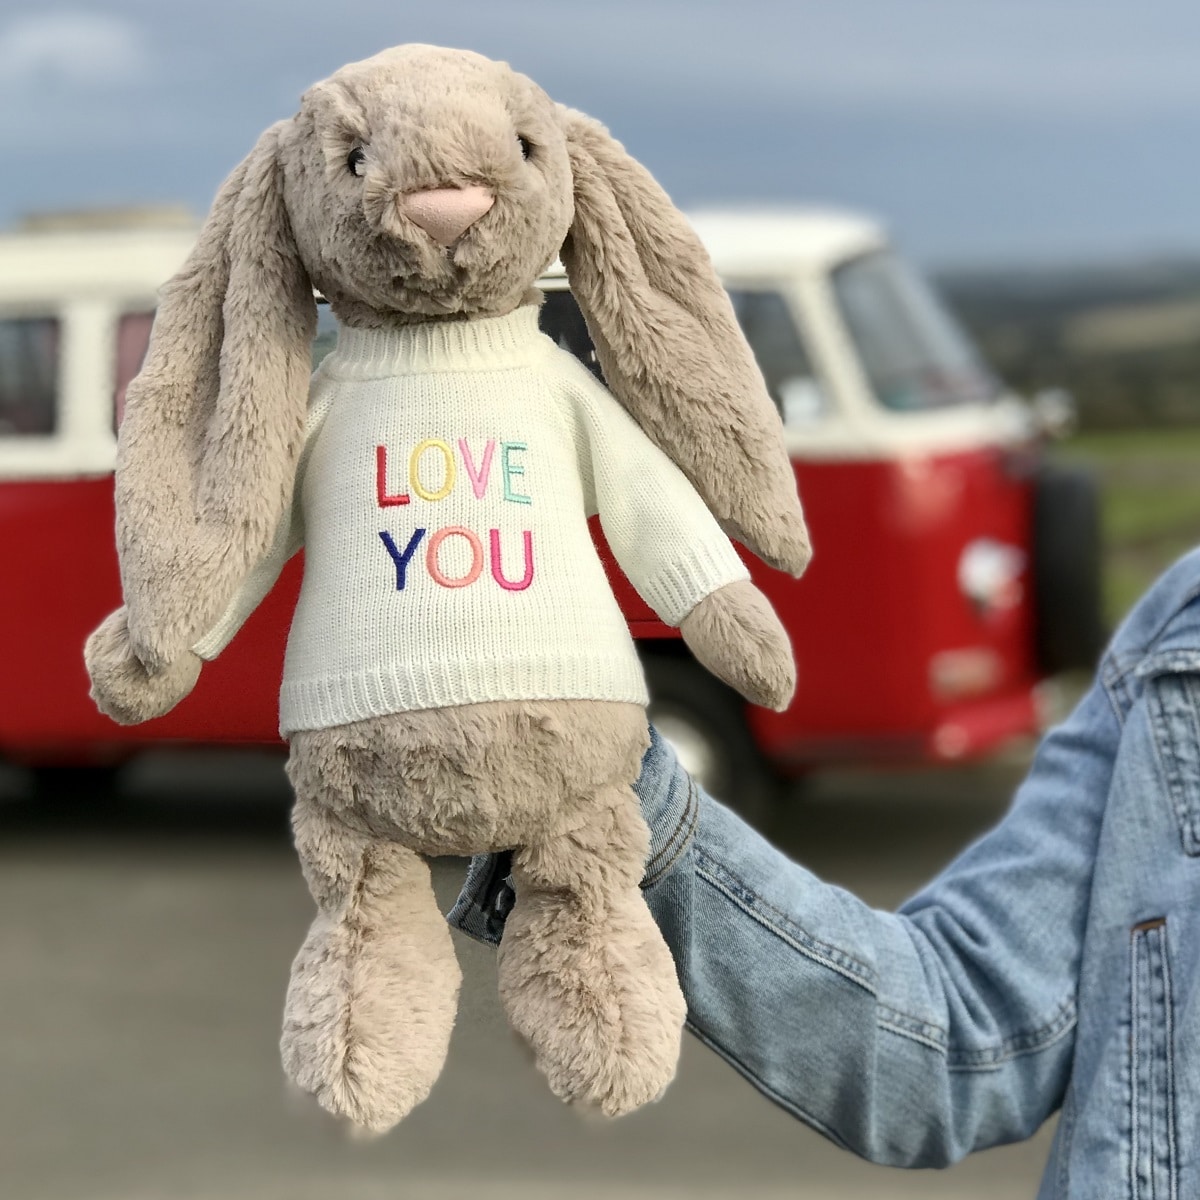 Bunny with Love You jumper